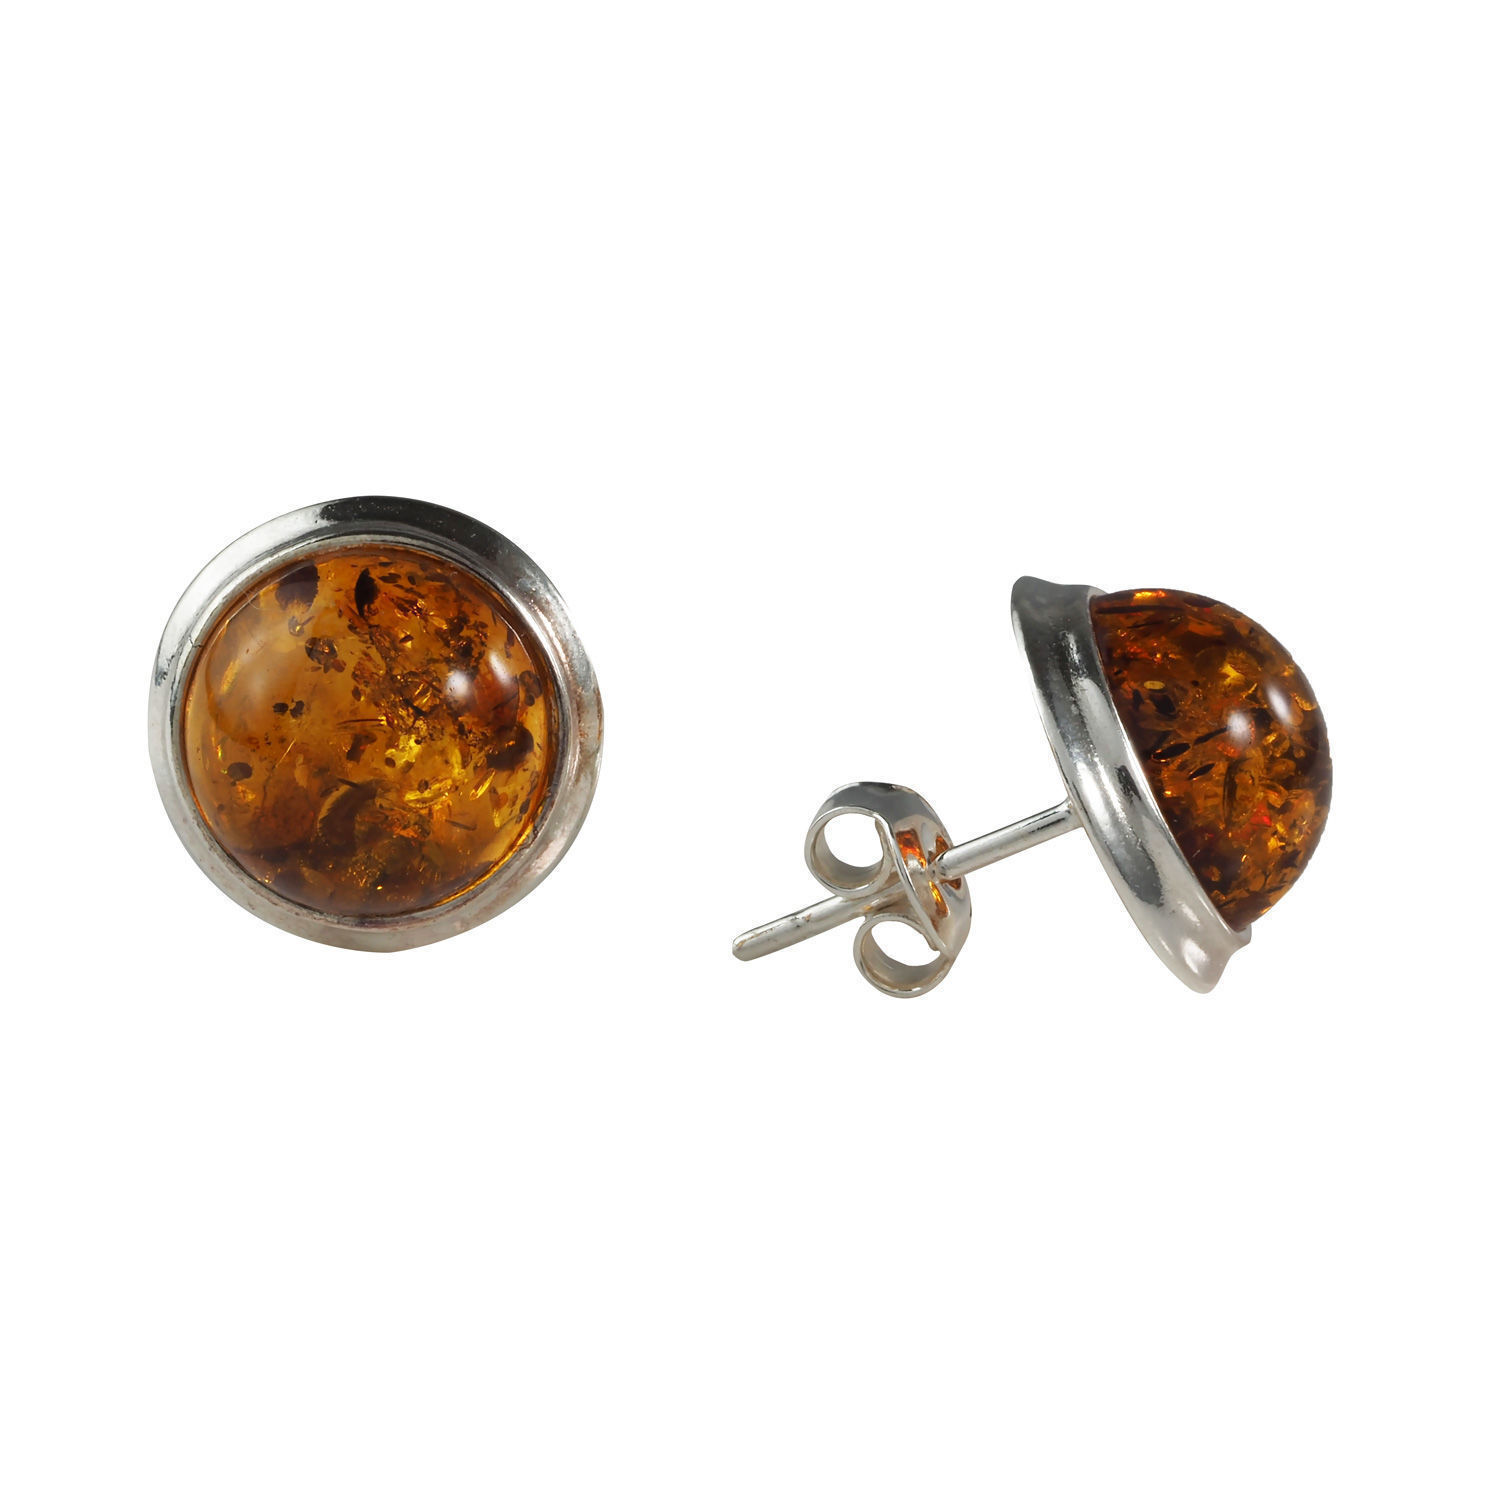 Sterling Silver and Baltic Honey Amber Earrings 